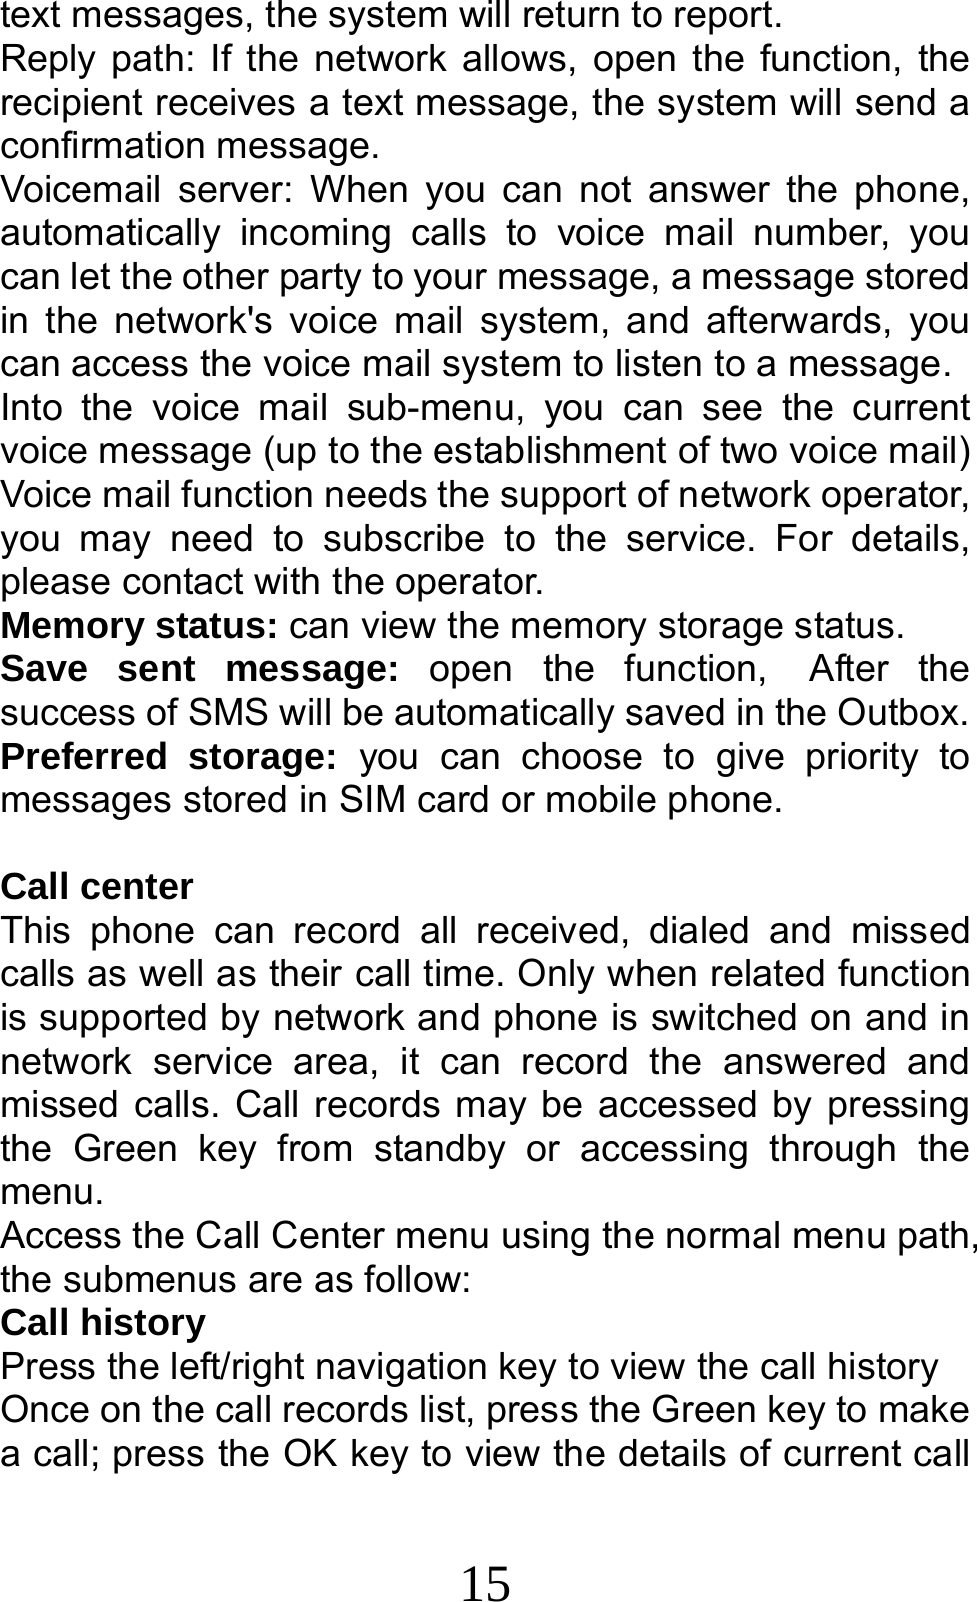 15 text messages, the system will return to report. Reply path: If the network allows, open the function, the recipient receives a text message, the system will send a confirmation message. Voicemail server: When you can not answer the phone, automatically incoming calls to voice mail number, you can let the other party to your message, a message stored in the network&apos;s voice mail system, and afterwards, you can access the voice mail system to listen to a message.   Into the voice mail sub-menu, you can see the current voice message (up to the establishment of two voice mail)   Voice mail function needs the support of network operator, you may need to subscribe to the service. For details, please contact with the operator. Memory status: can view the memory storage status. Save sent message: open the function, After the success of SMS will be automatically saved in the Outbox. Preferred storage: you can choose to give priority to messages stored in SIM card or mobile phone.  Call center This phone can record all received, dialed and missed calls as well as their call time. Only when related function is supported by network and phone is switched on and in network service area, it can record the answered and missed calls. Call records may be accessed by pressing the Green key from standby or accessing through the menu.  Access the Call Center menu using the normal menu path, the submenus are as follow: Call history Press the left/right navigation key to view the call history Once on the call records list, press the Green key to make a call; press the OK key to view the details of current call 